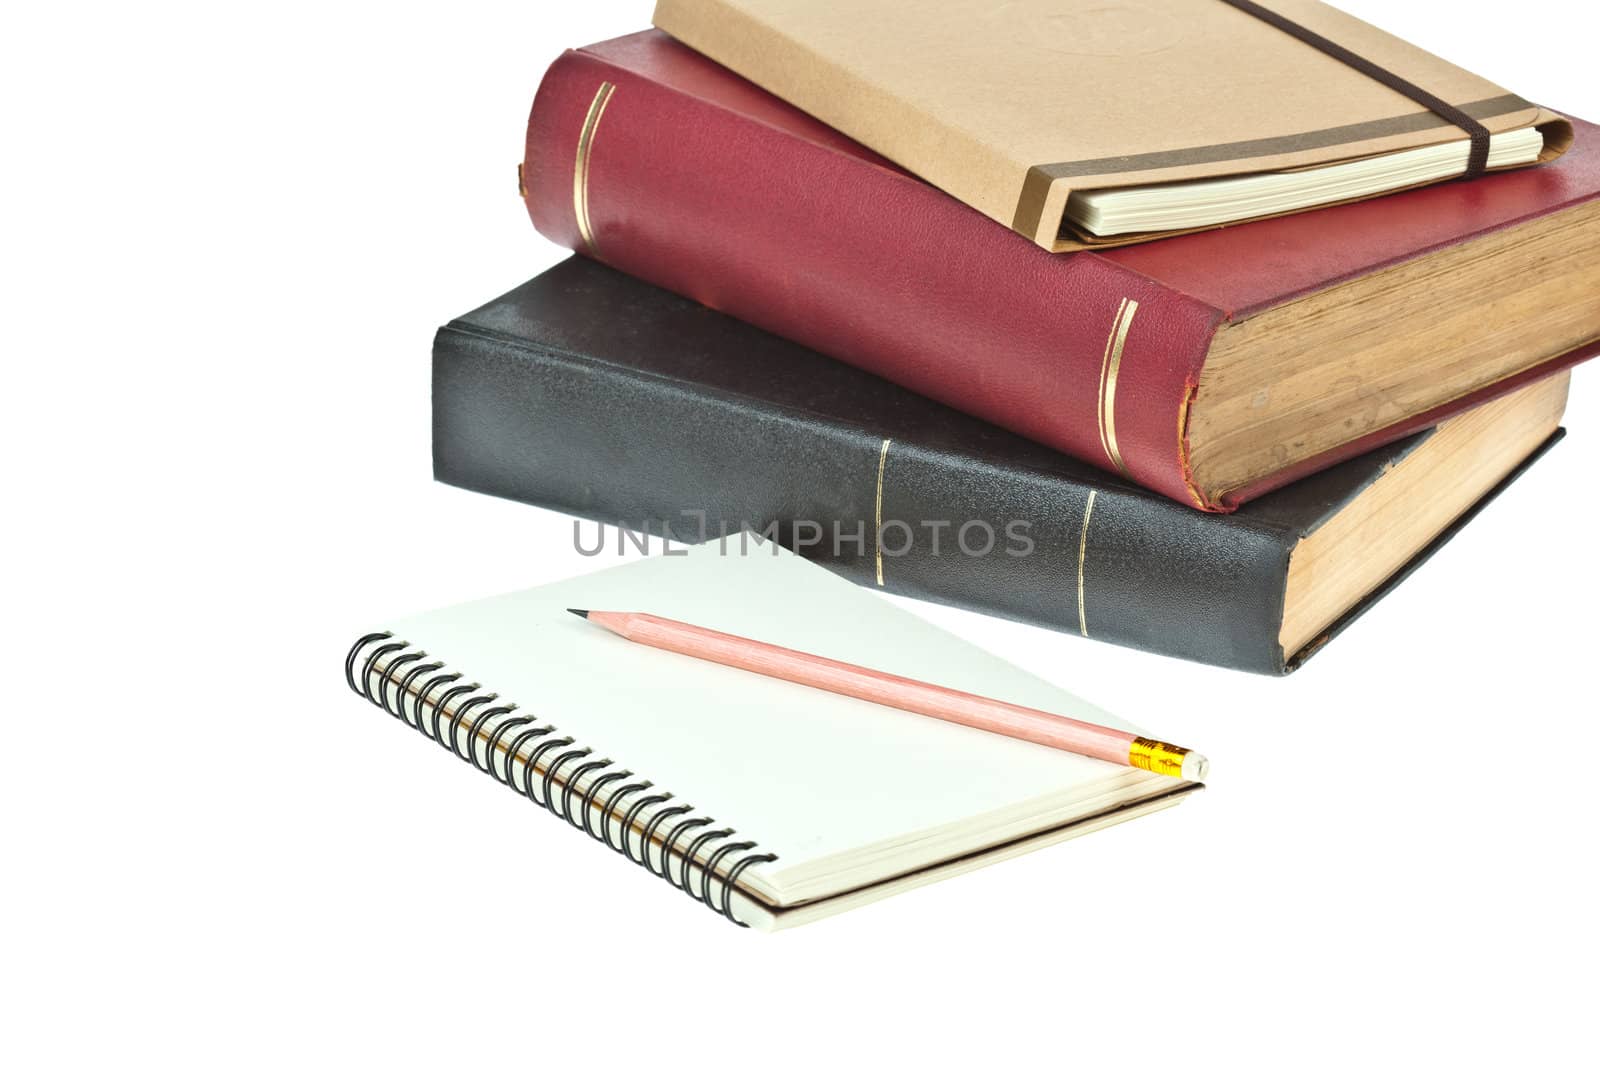 Pencil on, cream colored paper notebook and book as background by FrameAngel